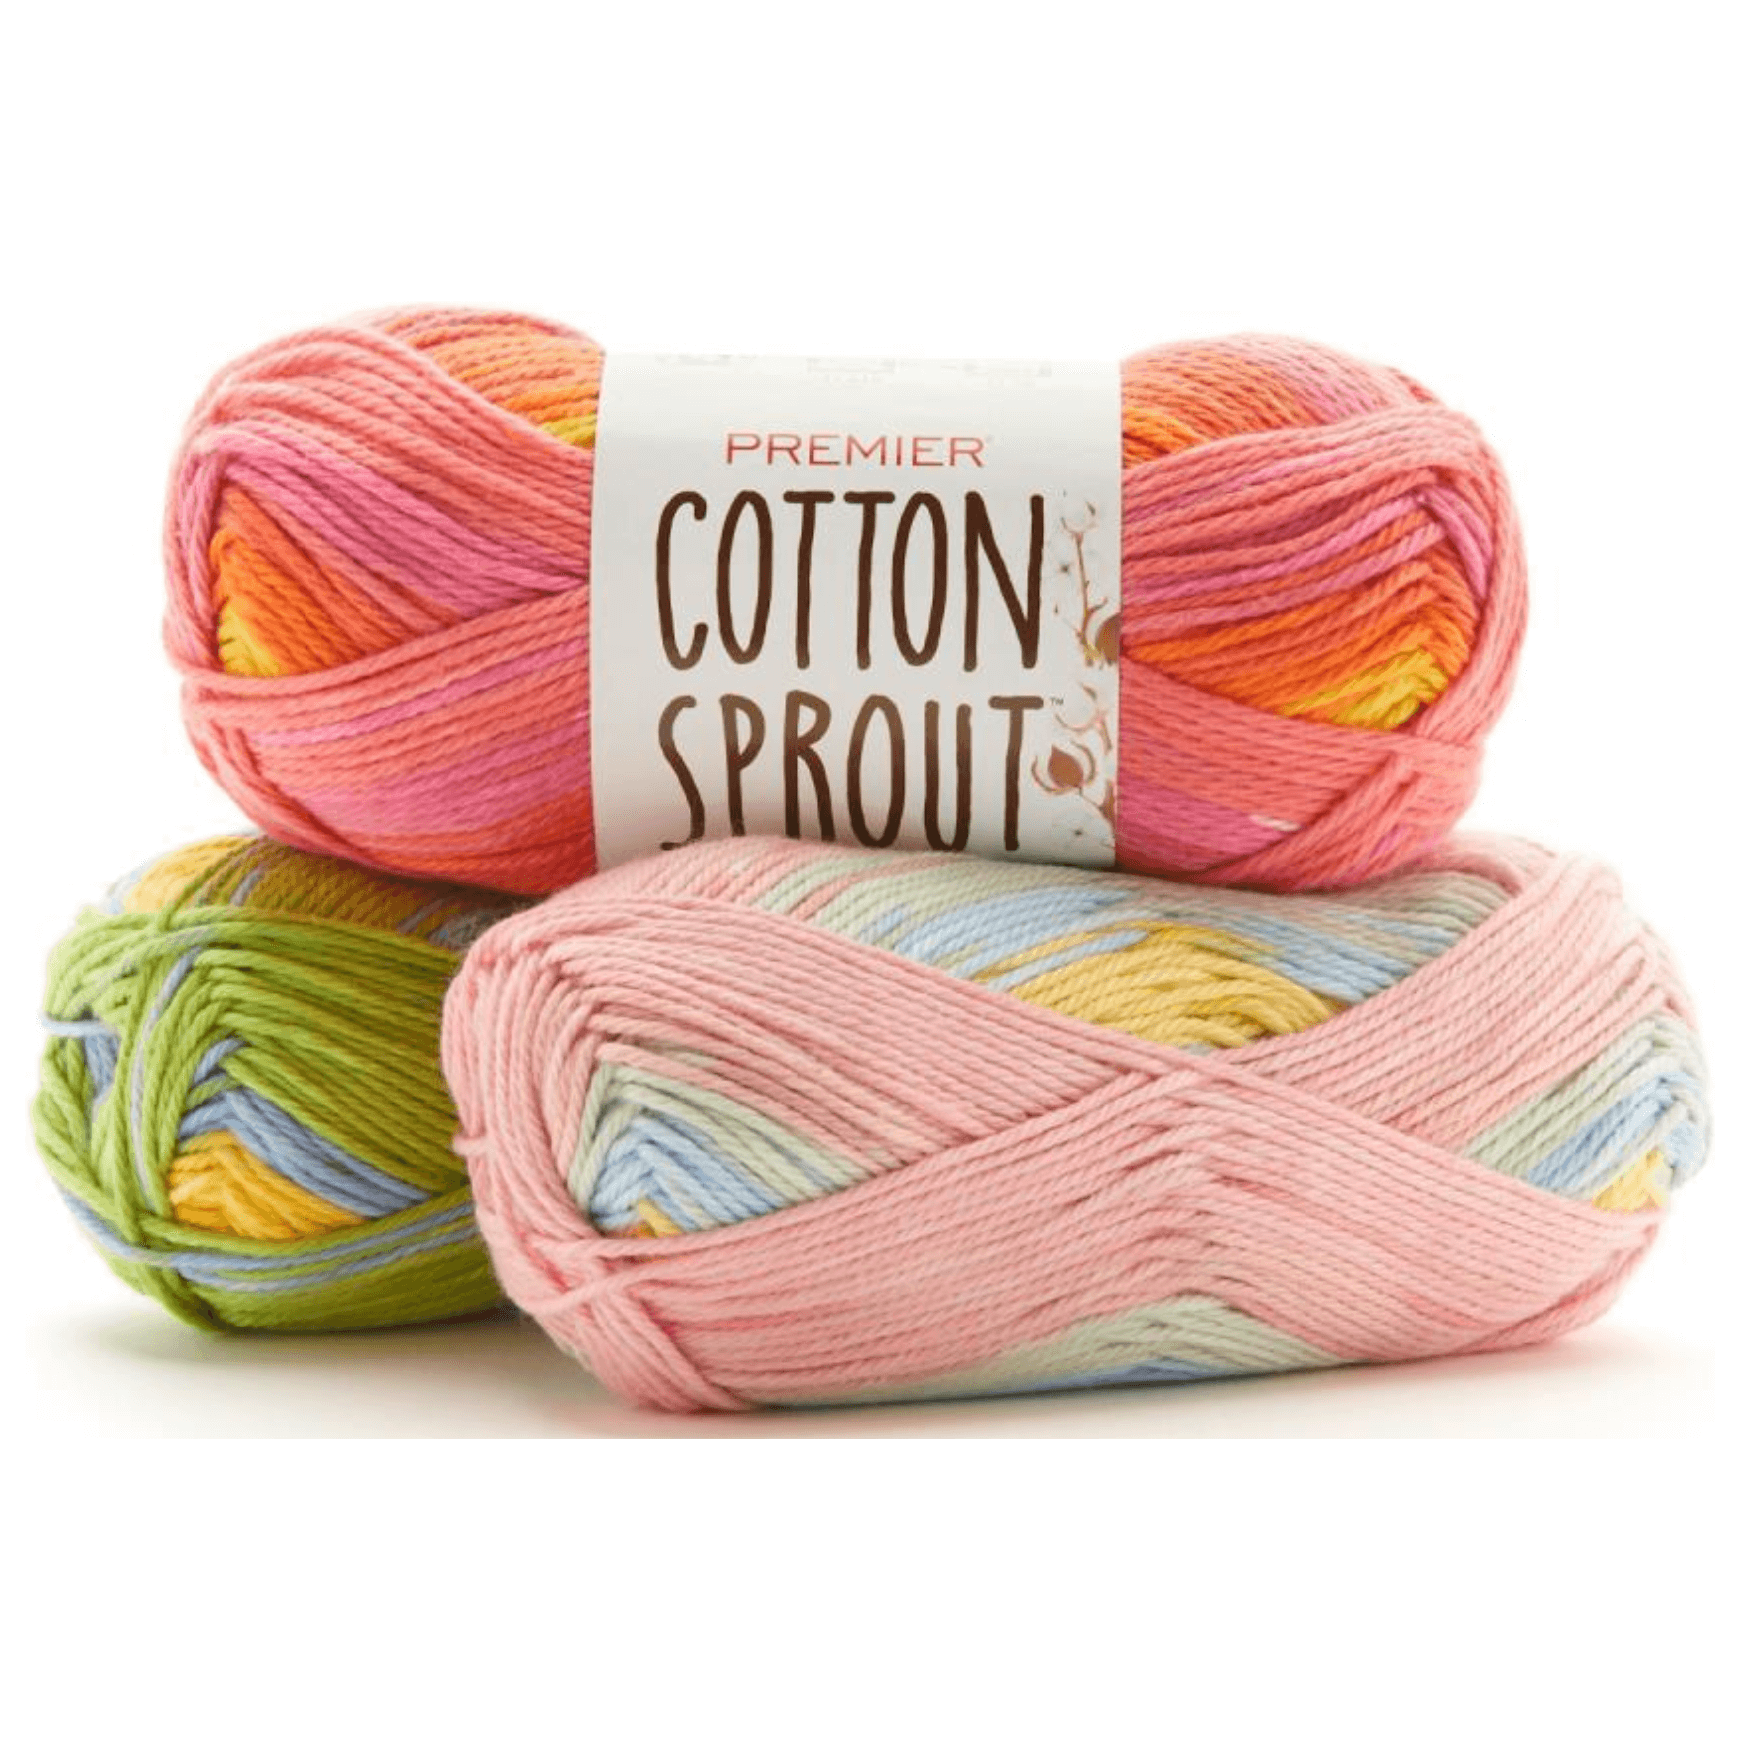 Premier Cotton Sprout Worsted Multi Yarn Sold As A 3 Pack